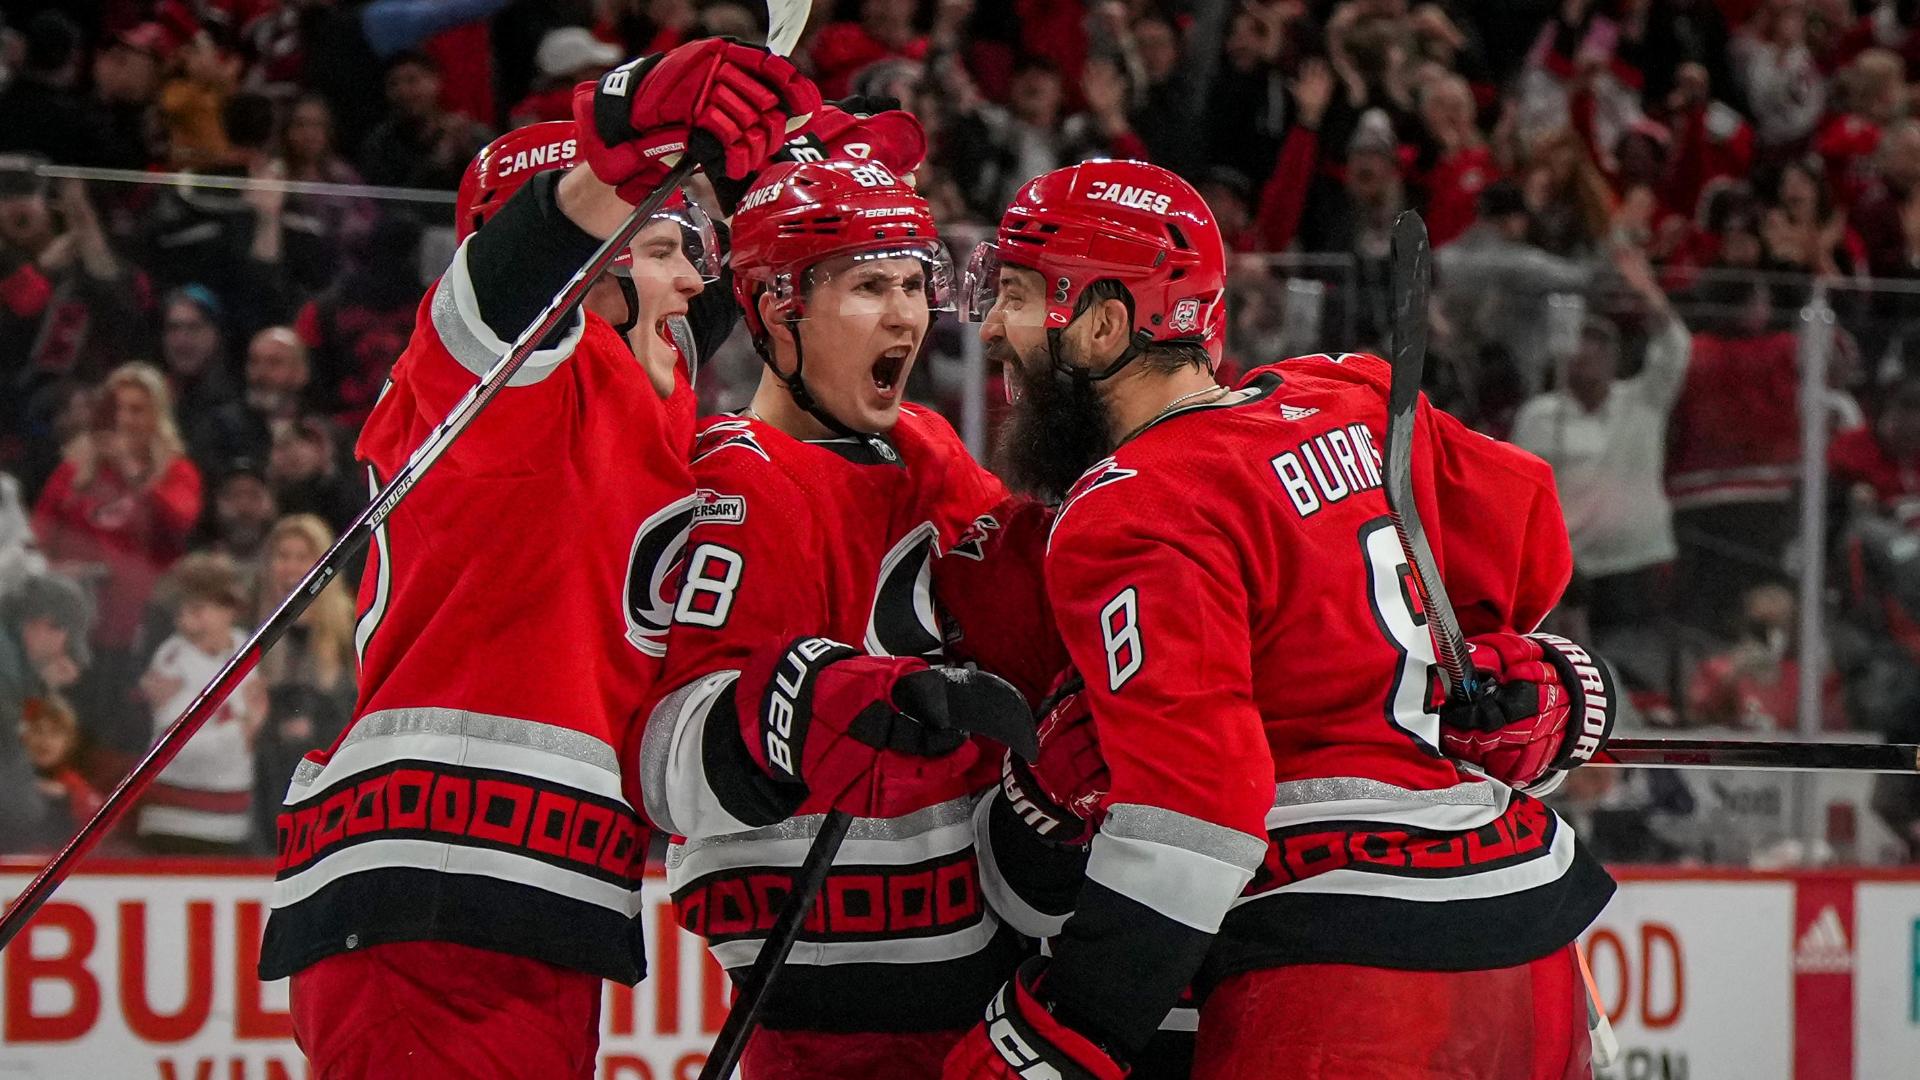 Aho scores on power play in OT, Hurricanes rally past Kings